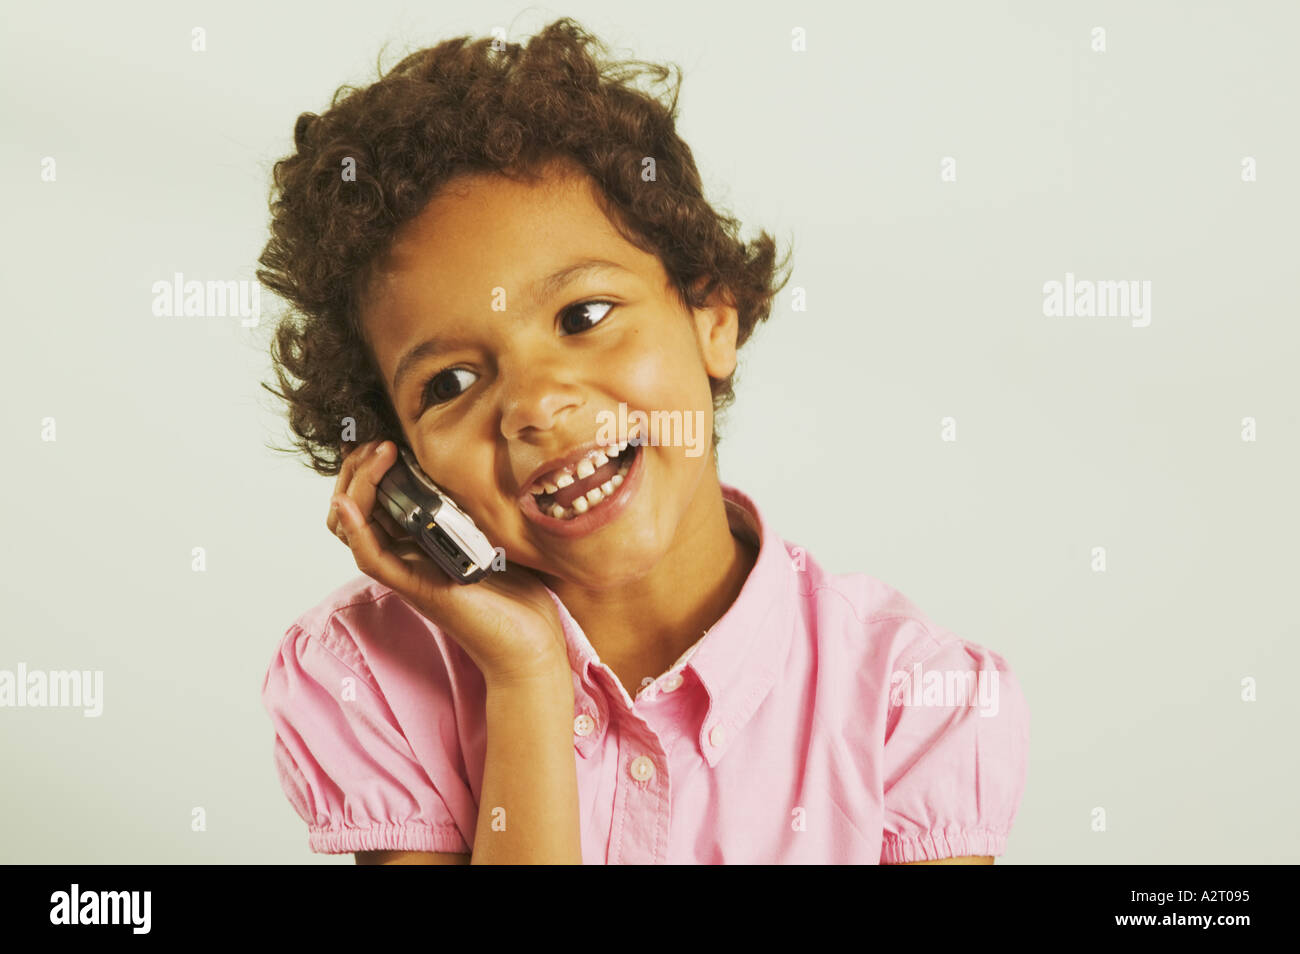 Young girl talking on a mobile phone Stock Photo